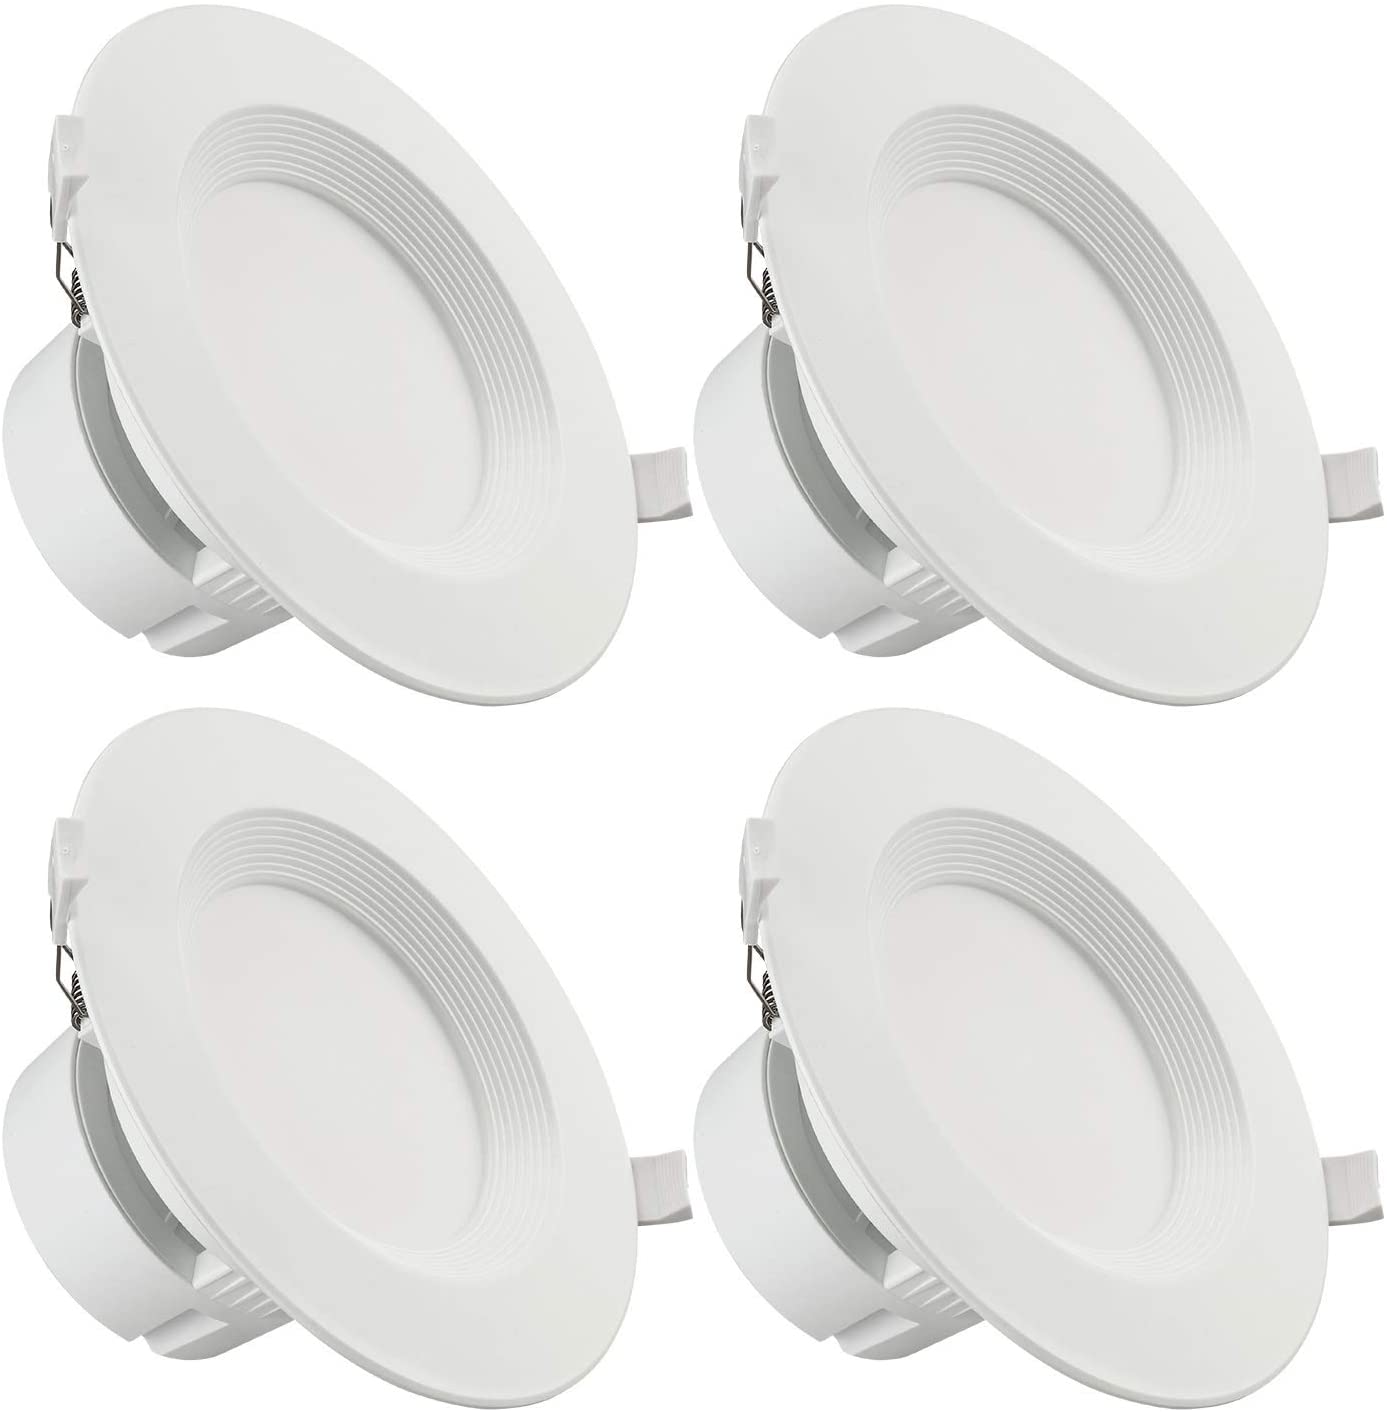 TORCHSTAR 9W 6 Inch LED Recessed Ceiling Light 